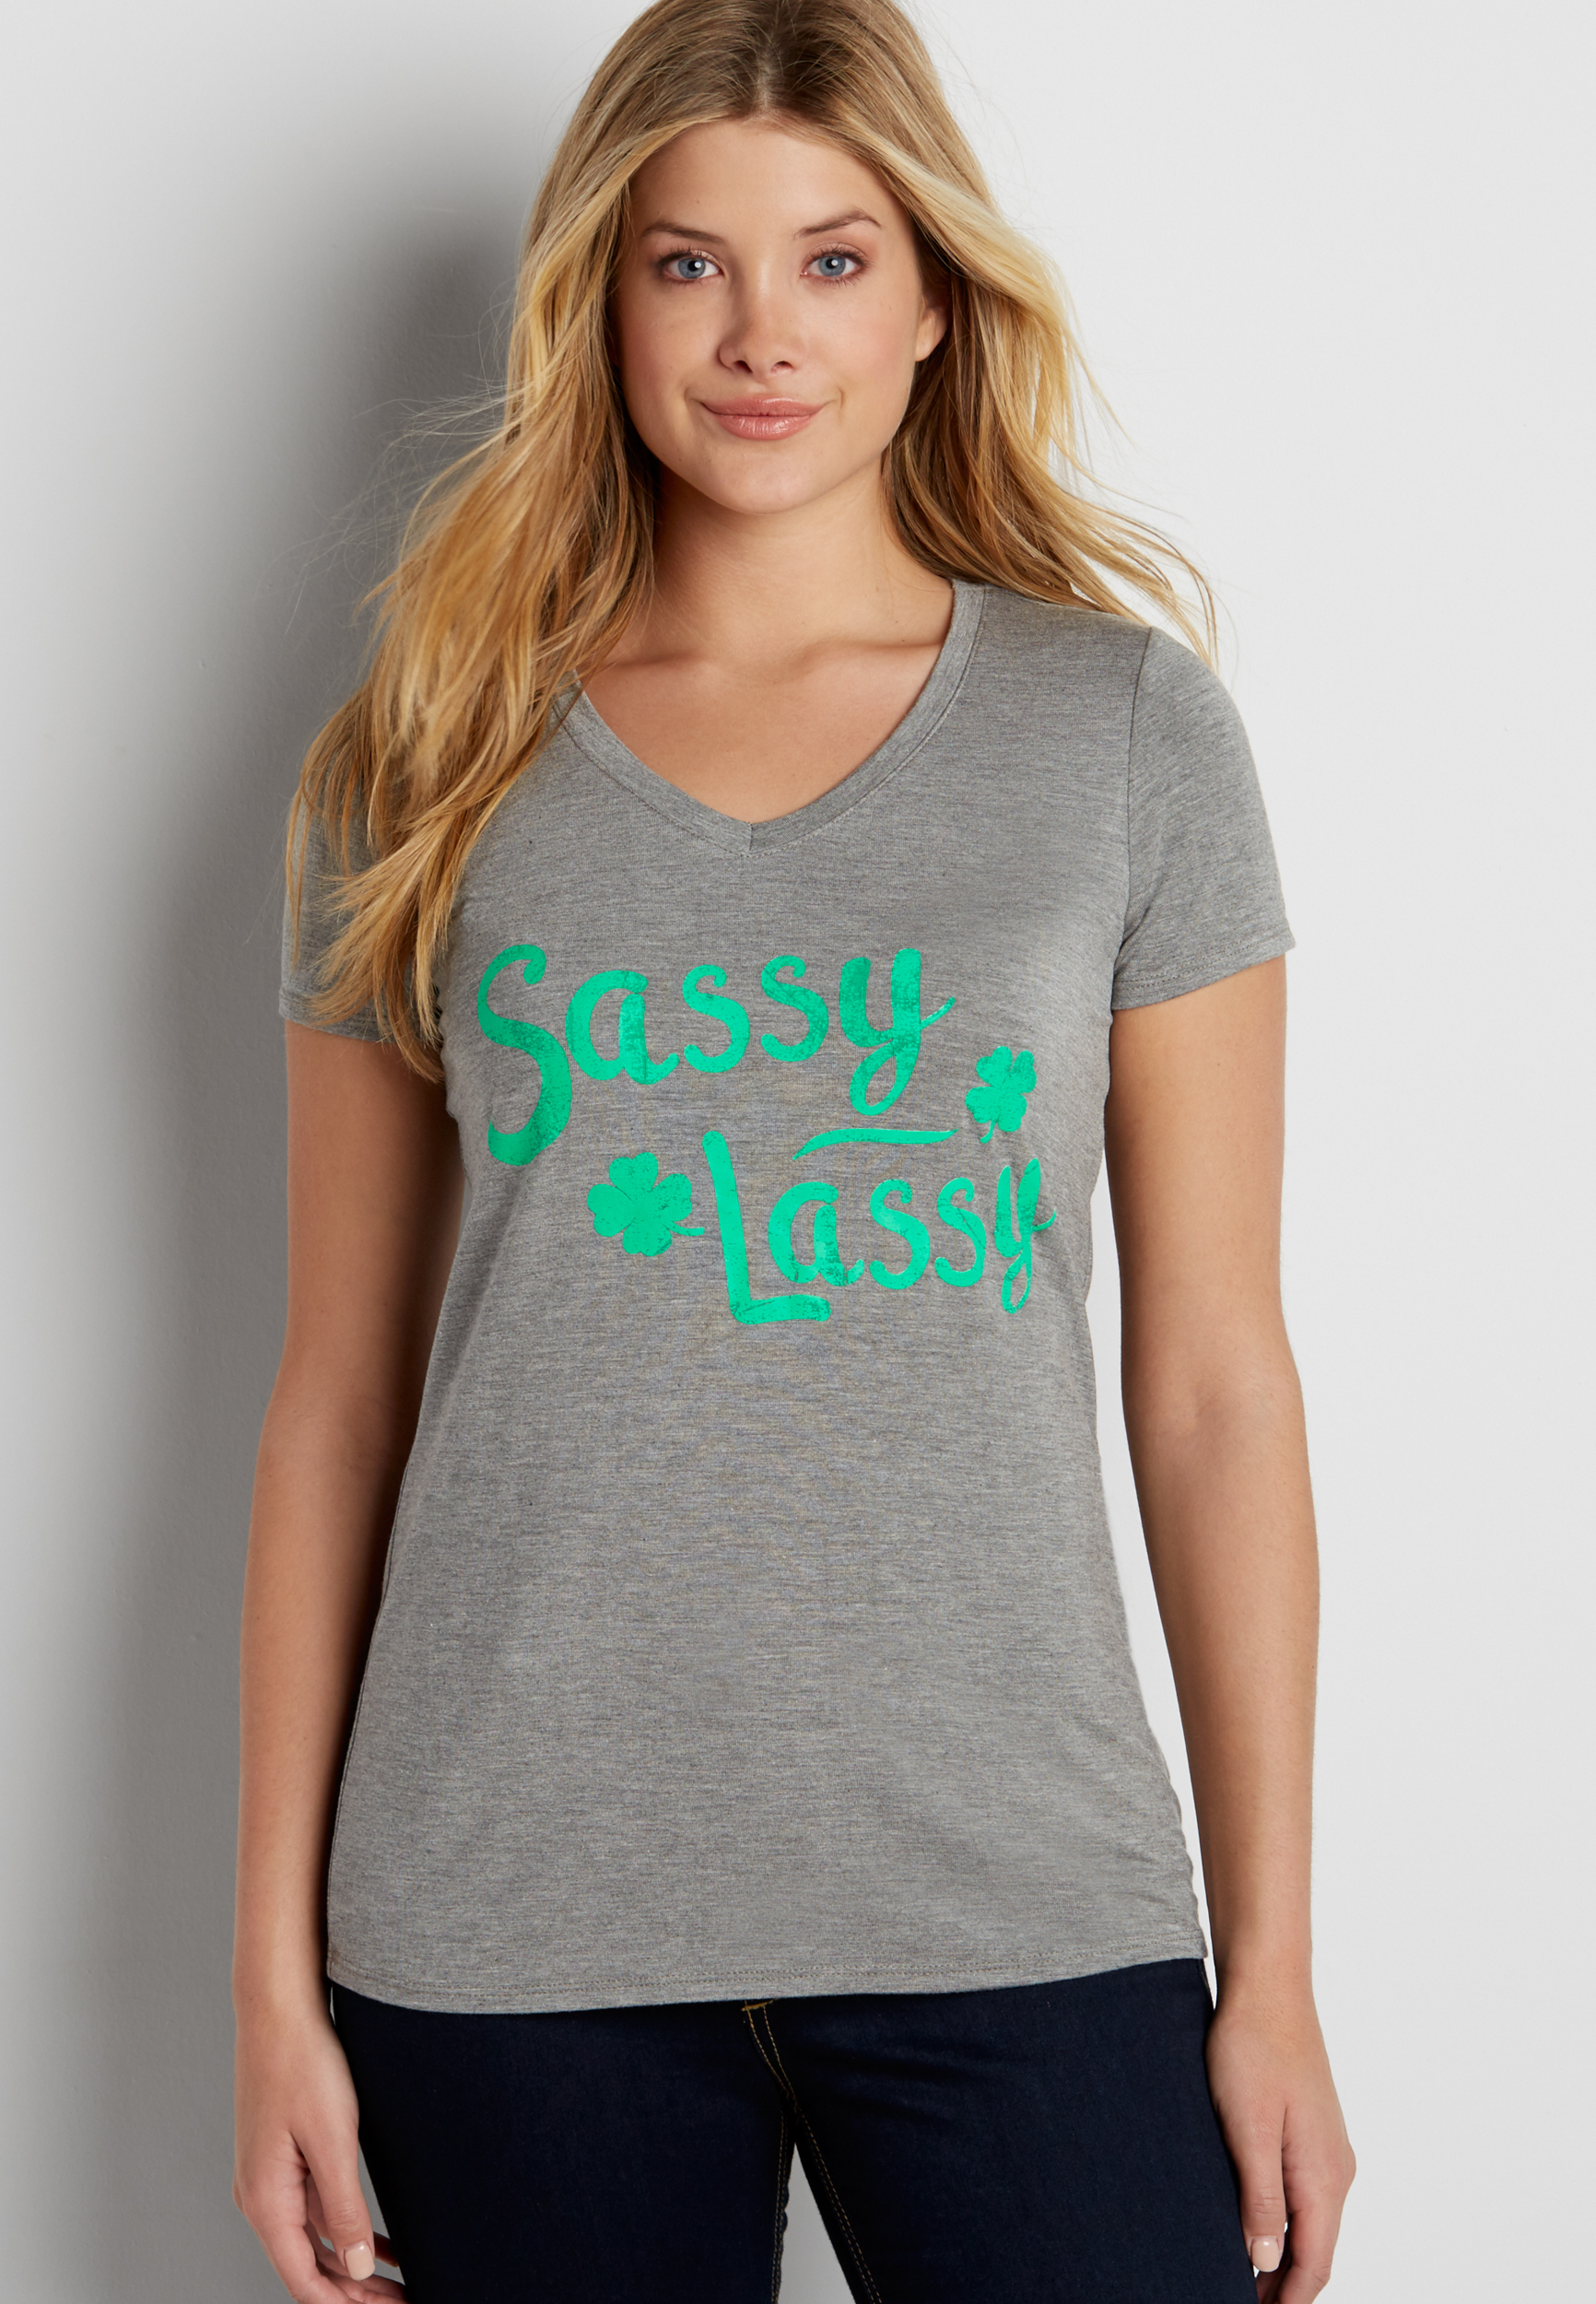 heathered tee with sassy lassy graphic | maurices